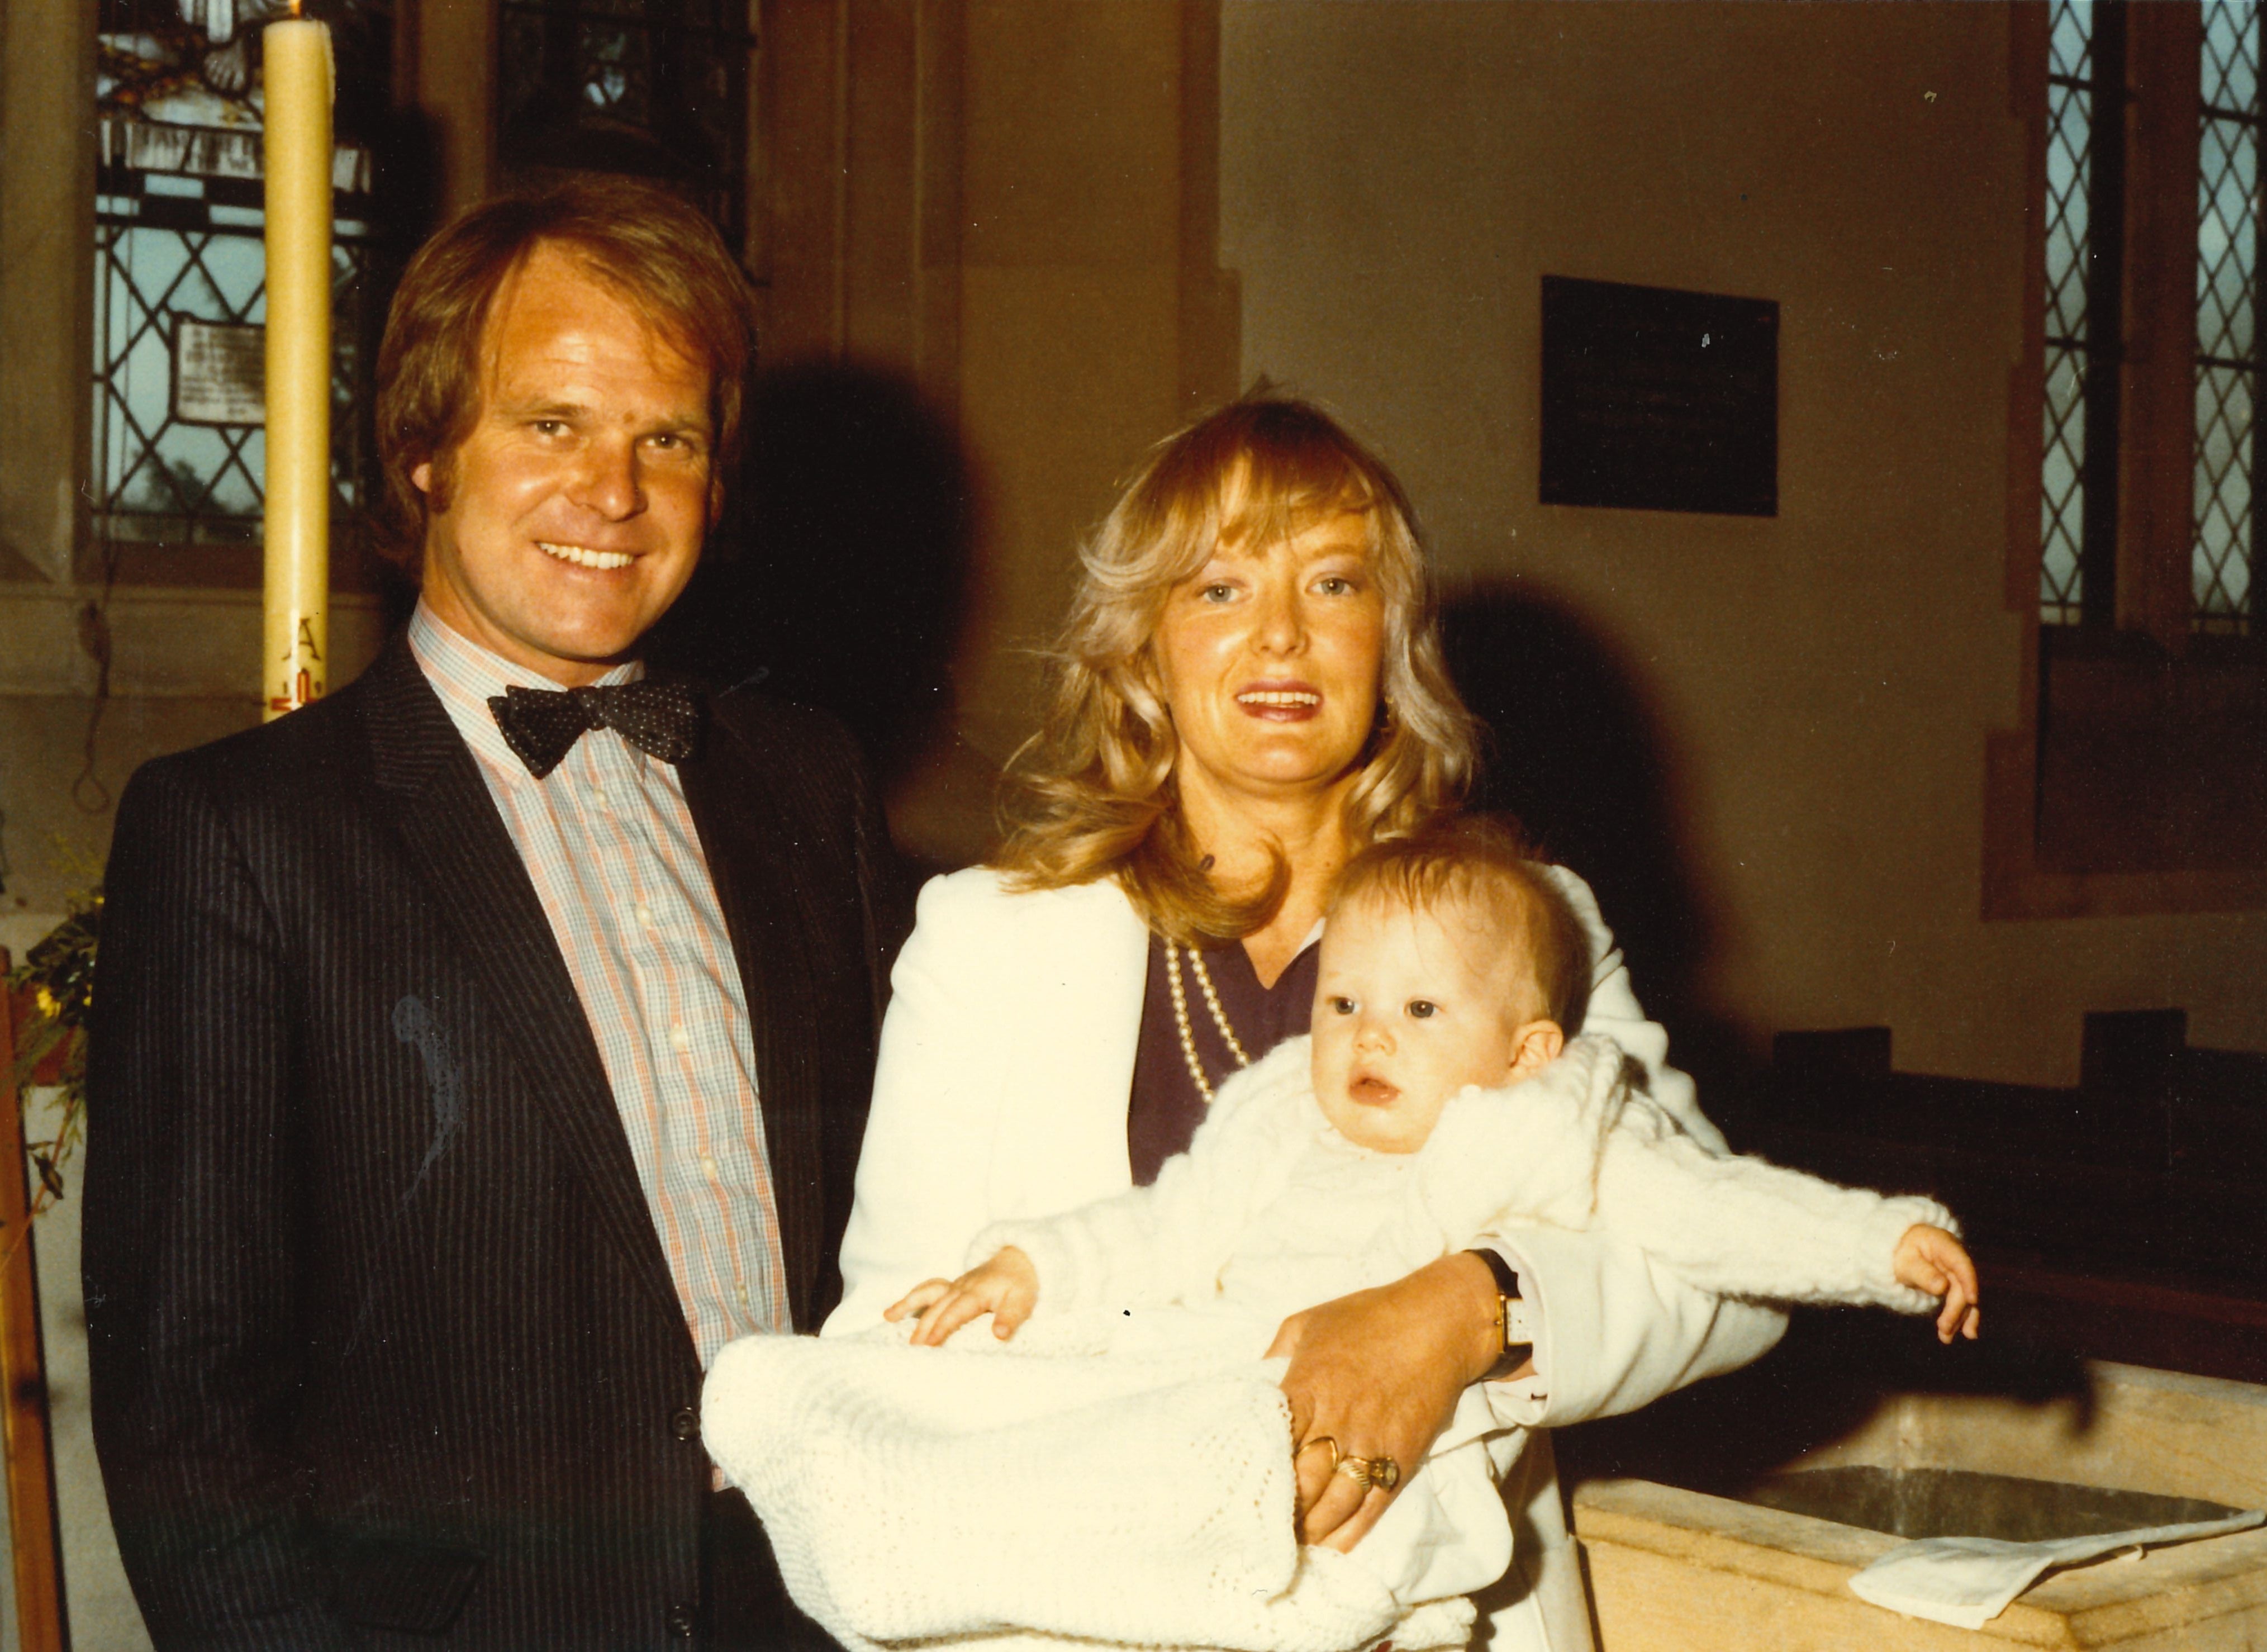 Steve and Gloria Dayman with their son Spencer on his christening day.